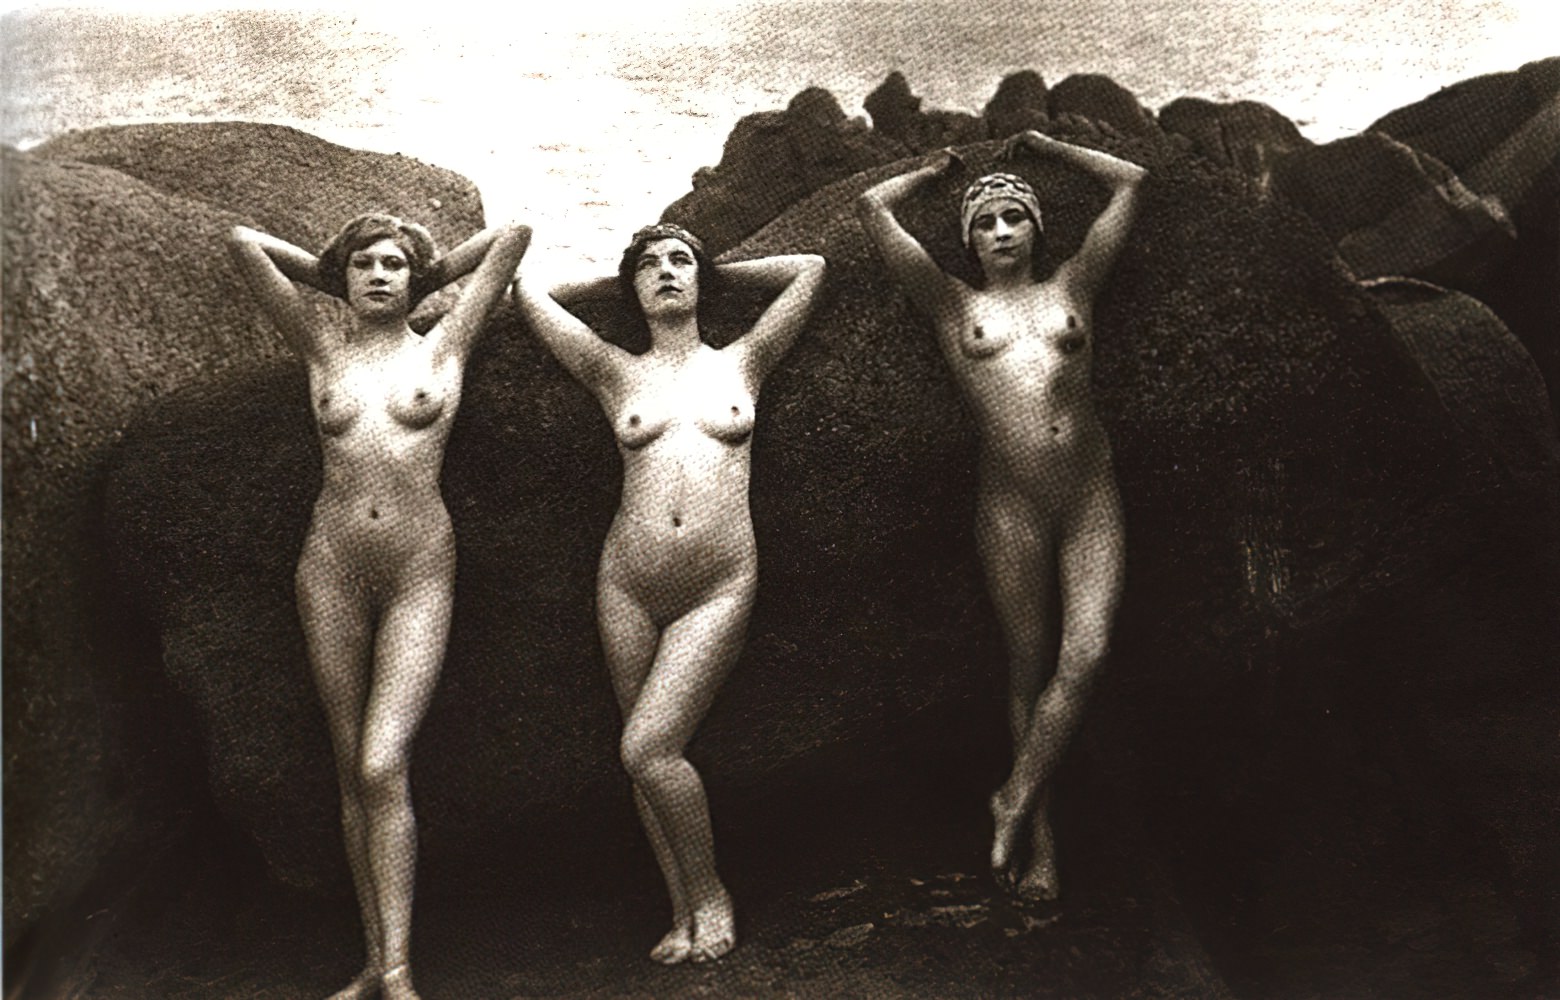 In Nude Photography, 1840–1920, Peter Marshall notes